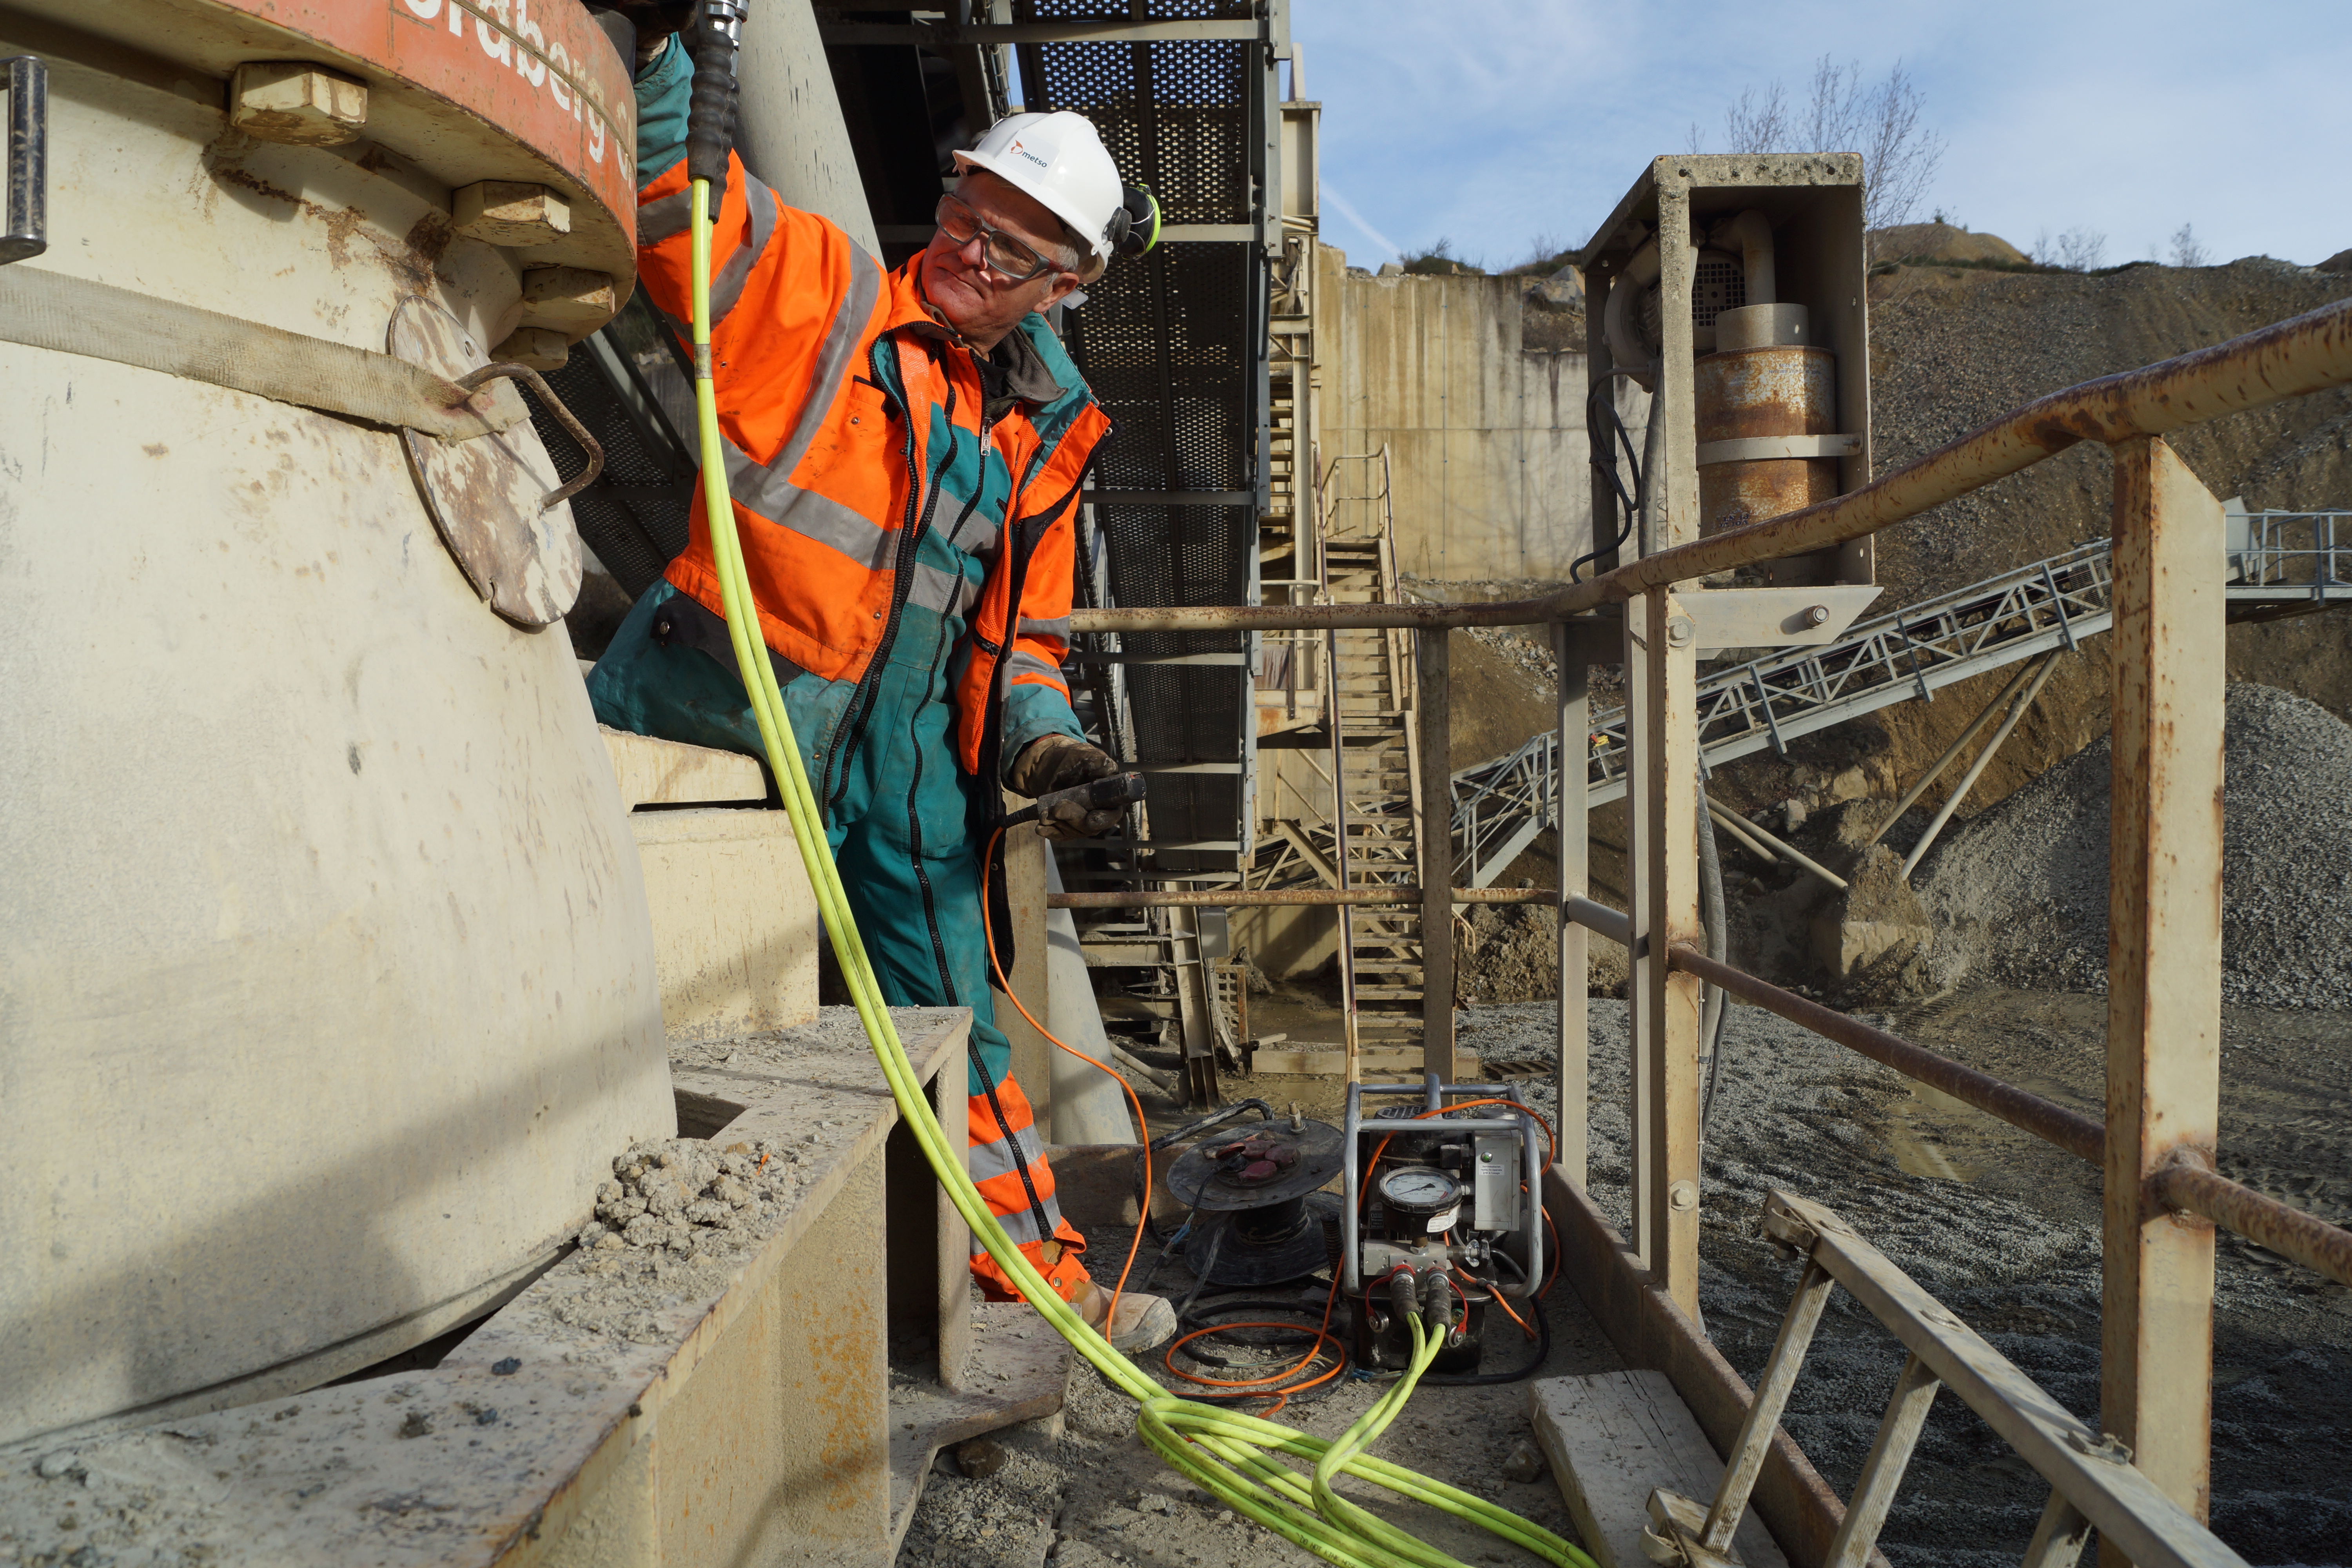 More thorough and specialized inspections should then be conducted by Metso experts.